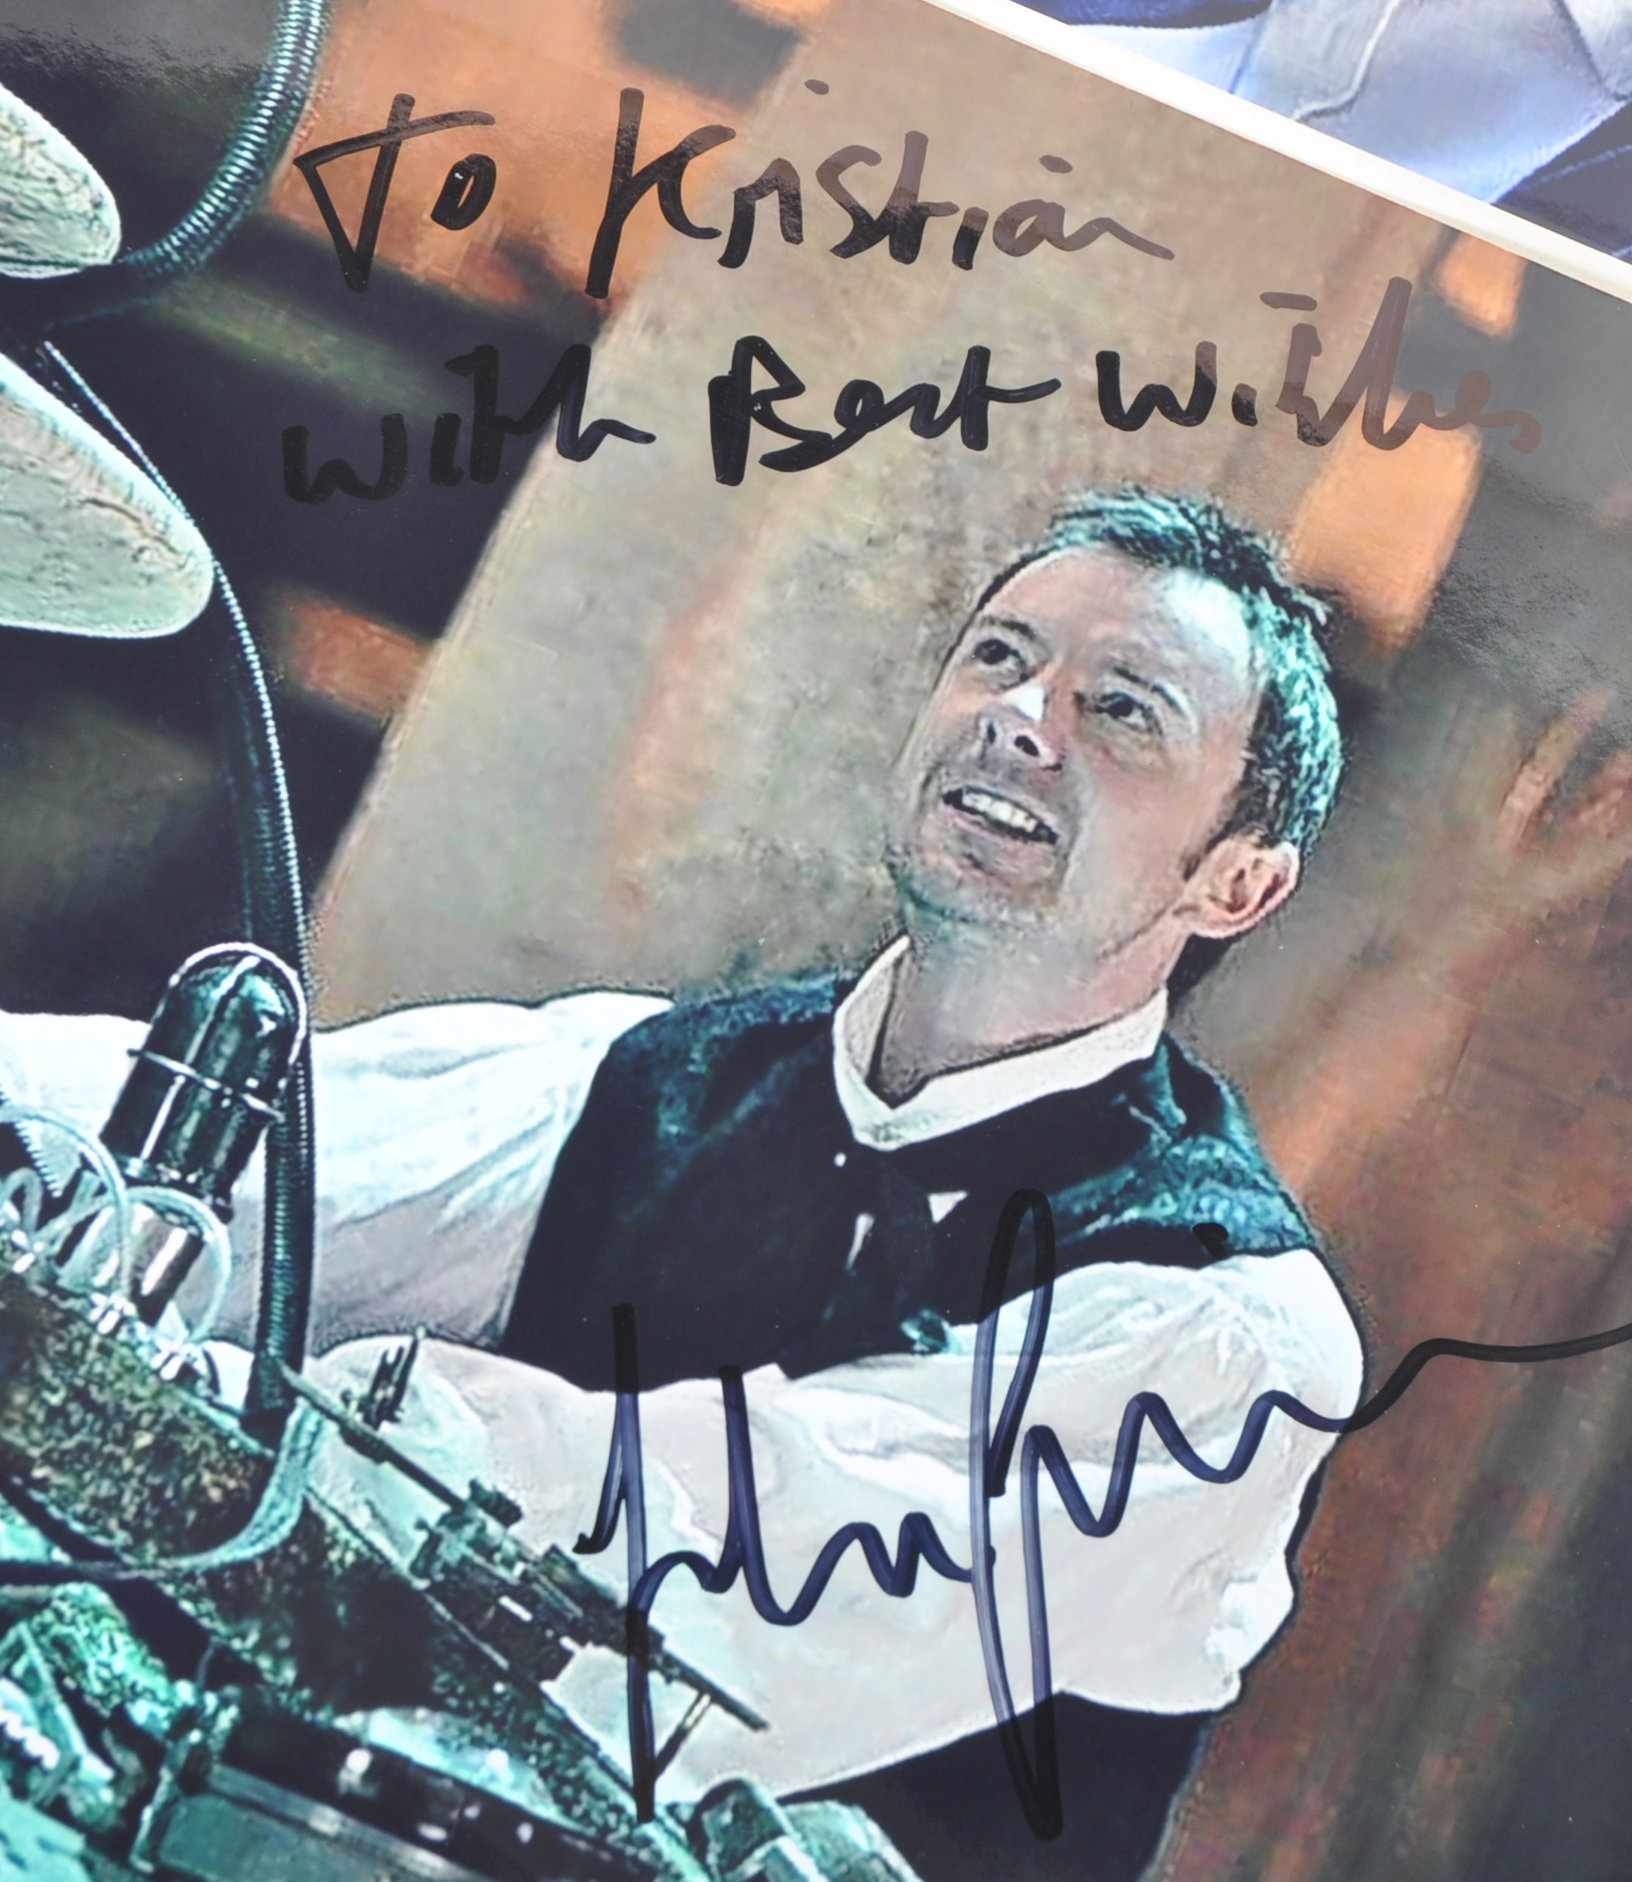 DOCTOR WHO - COLLECTION OF SIGNED 8X10" PHOTOGRAPHS - Image 17 of 19